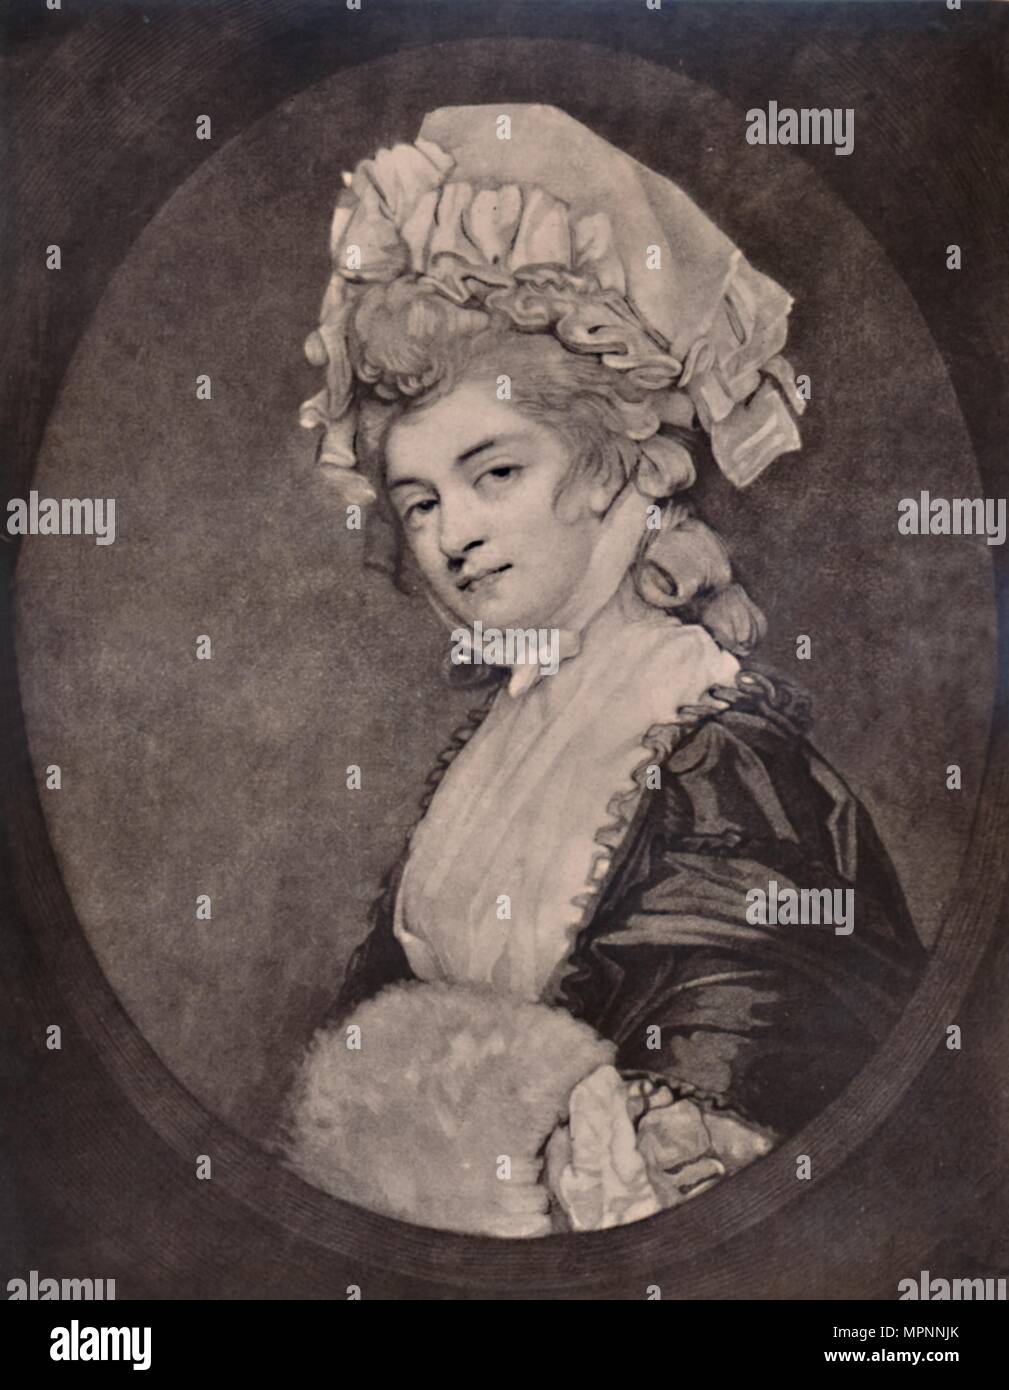 Mary 'Perdita' Robinson, actrice anglaise, c1781 (1894). Artiste : John Raphael Smith. Banque D'Images